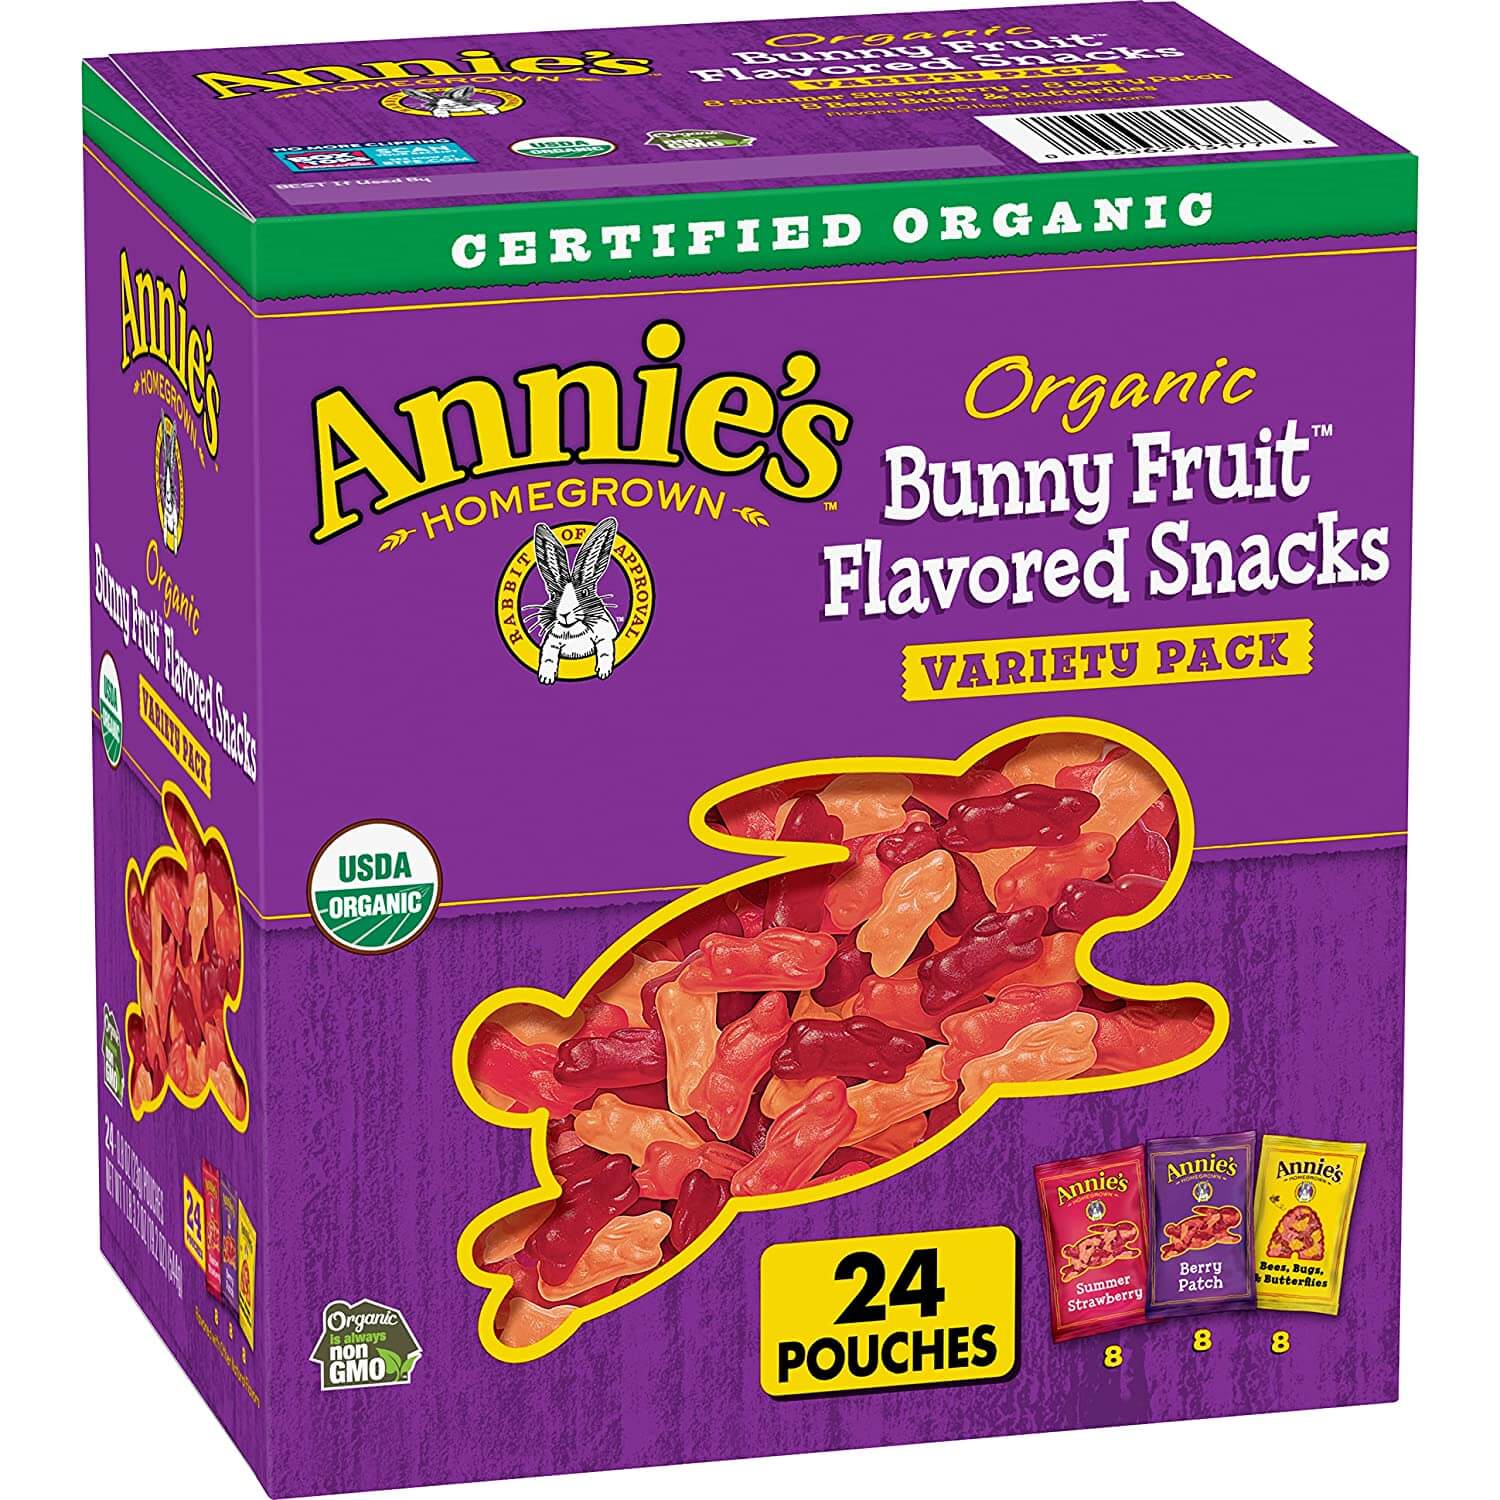 purple box with bunny shape filled with image of bunny shaped fruit snacks